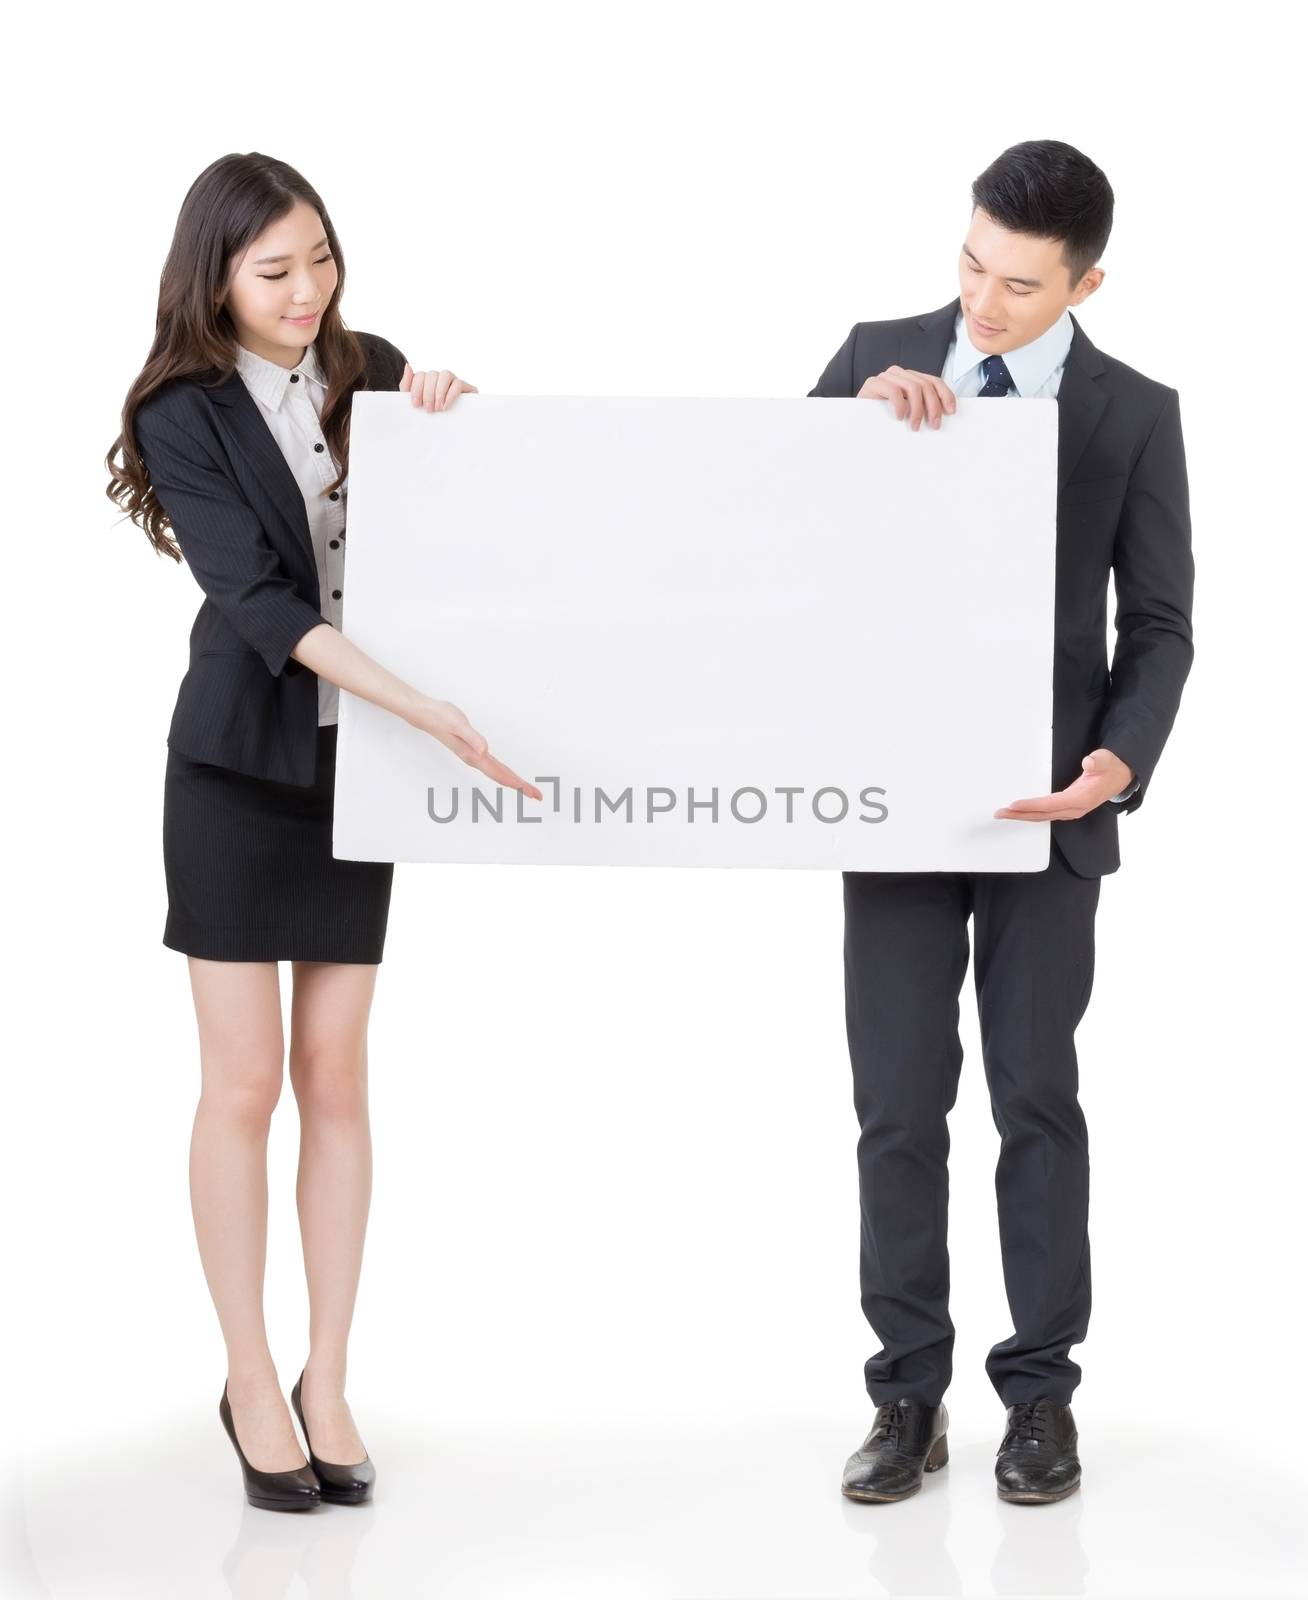 Business man and woman holding blank white board, full length portrait isolated on white background.